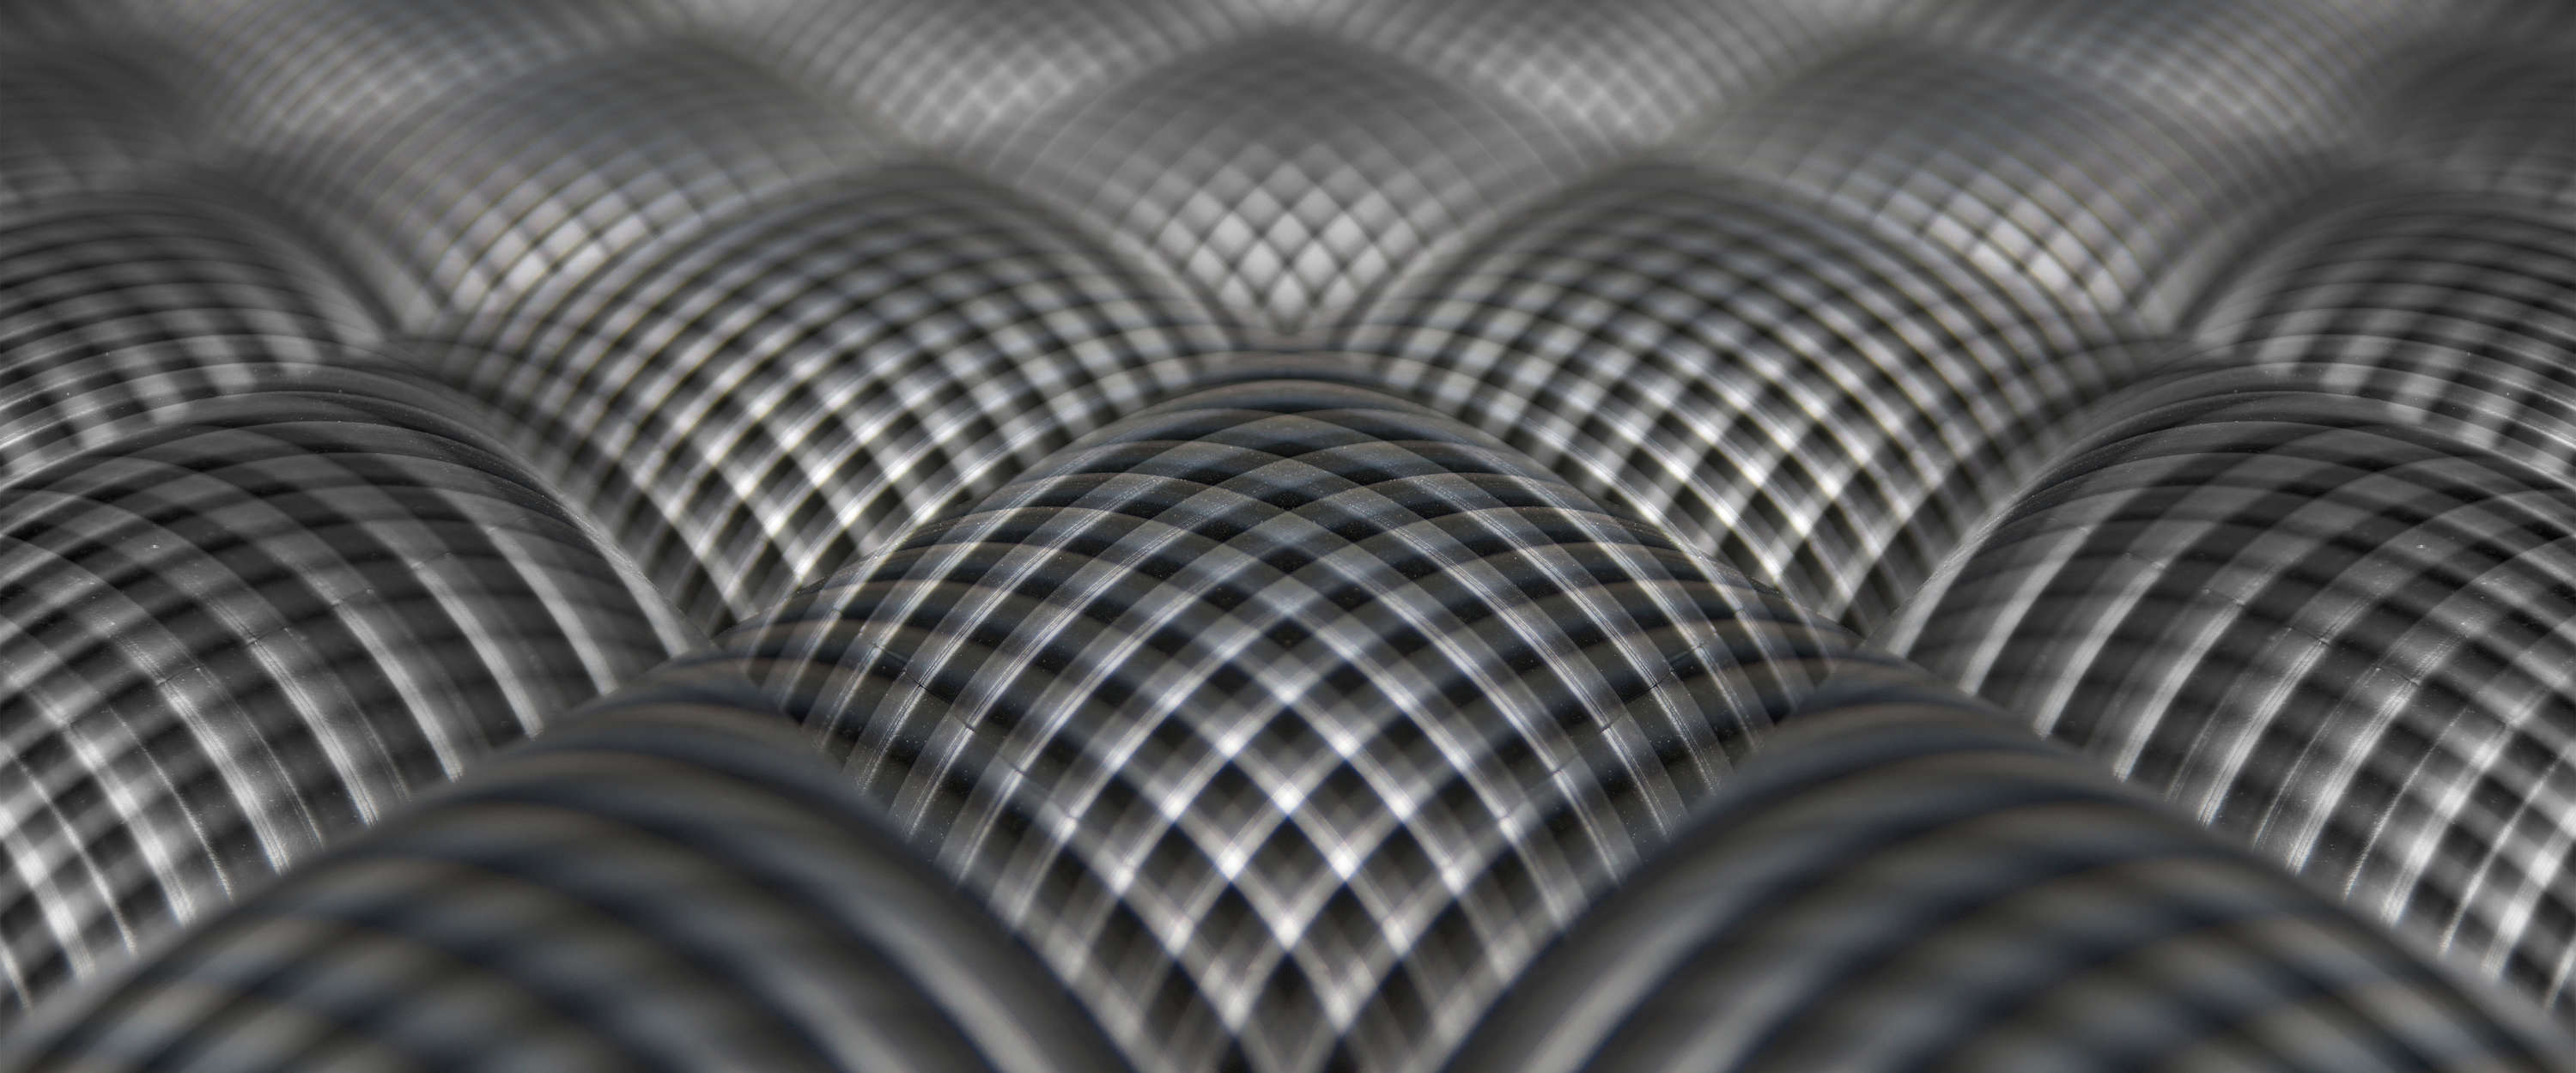             Photo wallpaper industrial design with 3D wave pattern
        